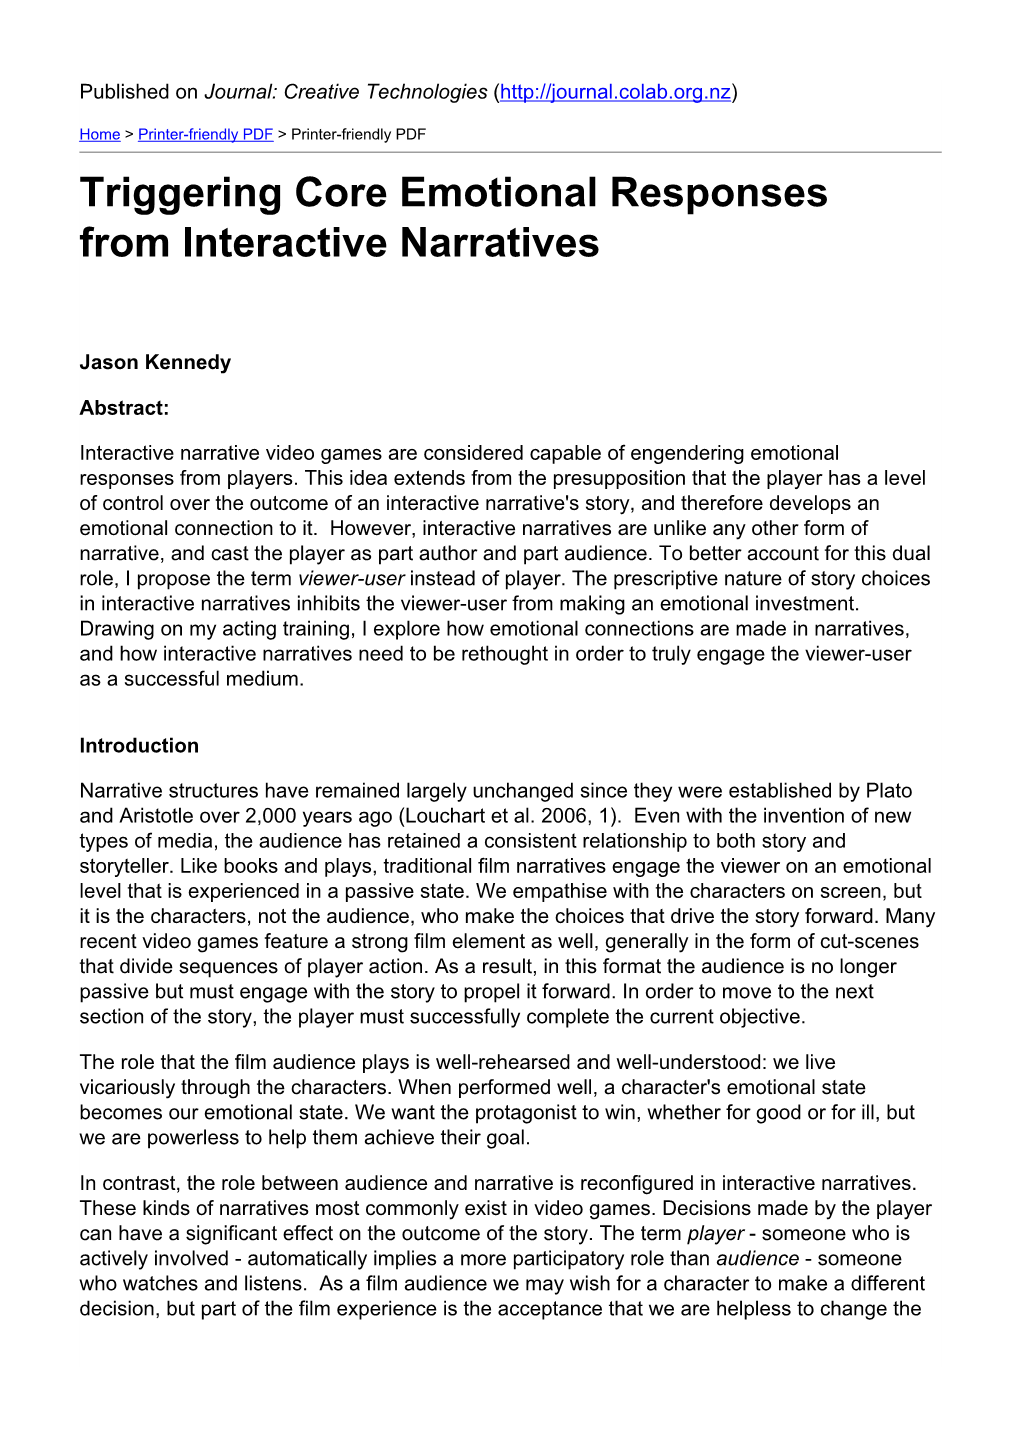 Triggering Core Emotional Responses from Interactive Narratives